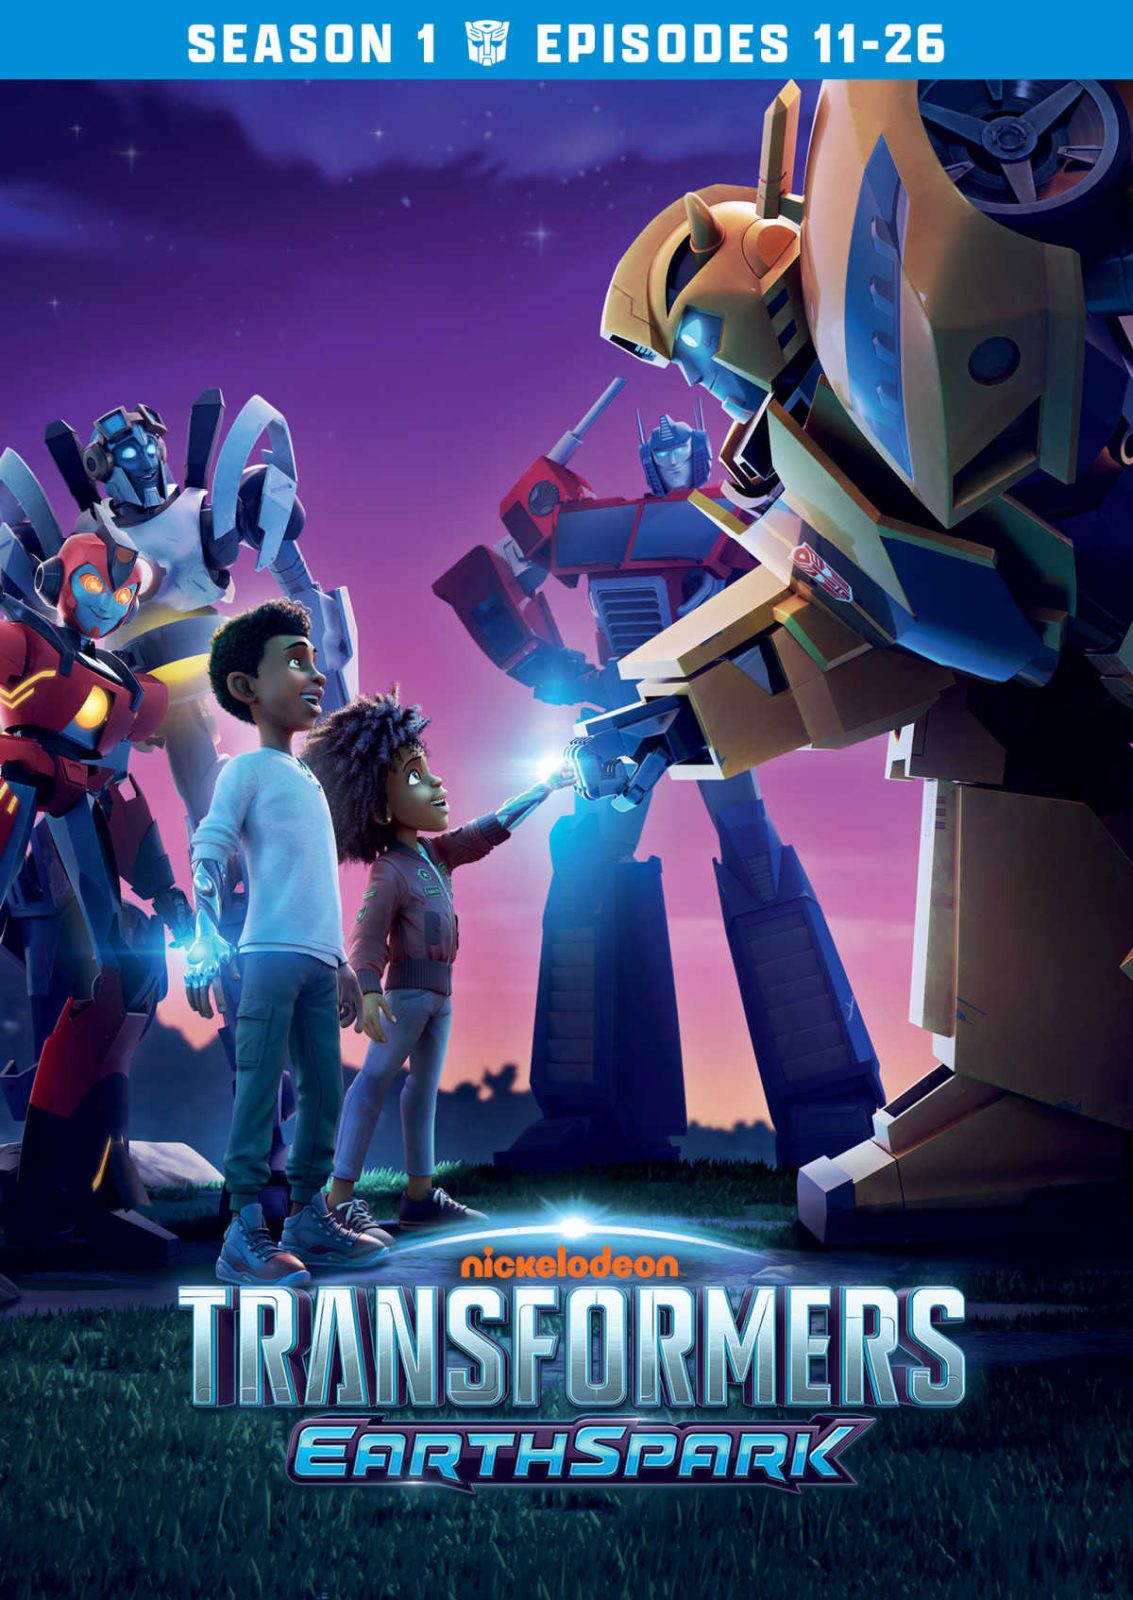 The war is over, but new threats emerge in the latest Transformers Earthspark DVD Season 1, Vol. 2! Join Robby, Mo, and the Terrans as they team up with Optimus Prime and Bumblebee to battle the villainous Mandroid. 